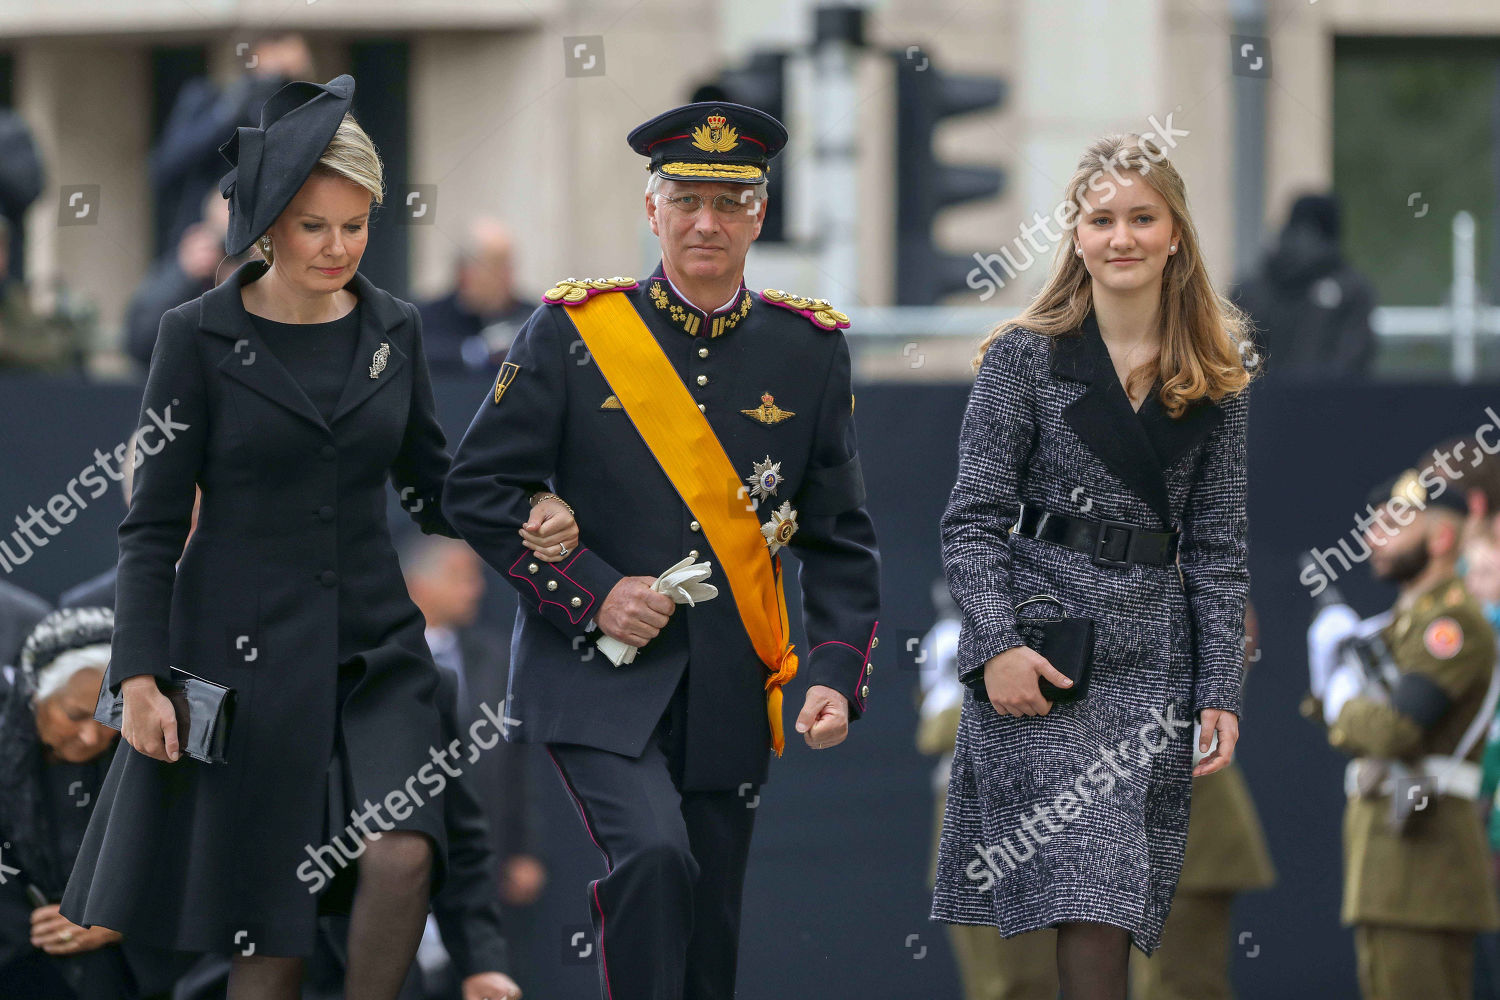 grand-duke-jean-funeral-mass-catherdral-notre-dame-luxembourg-shutterstock-editorial-10228135eh.jpg